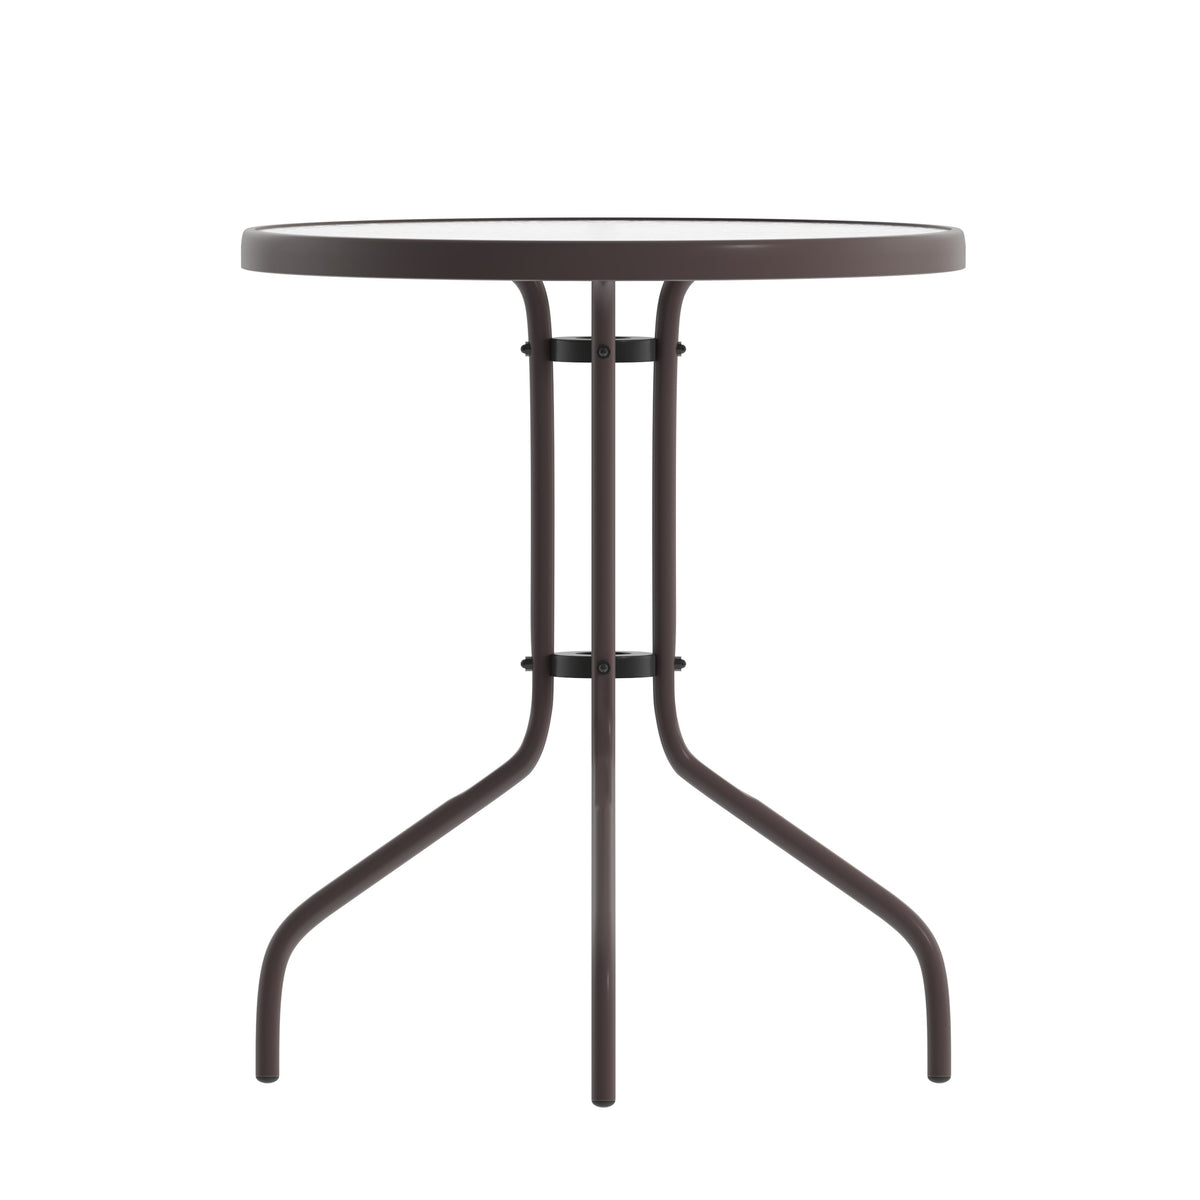 Clear/Bronze |#| 23.75inch Round Tempered Glass Metal Table with Smooth Ripple Design Top - Bronze